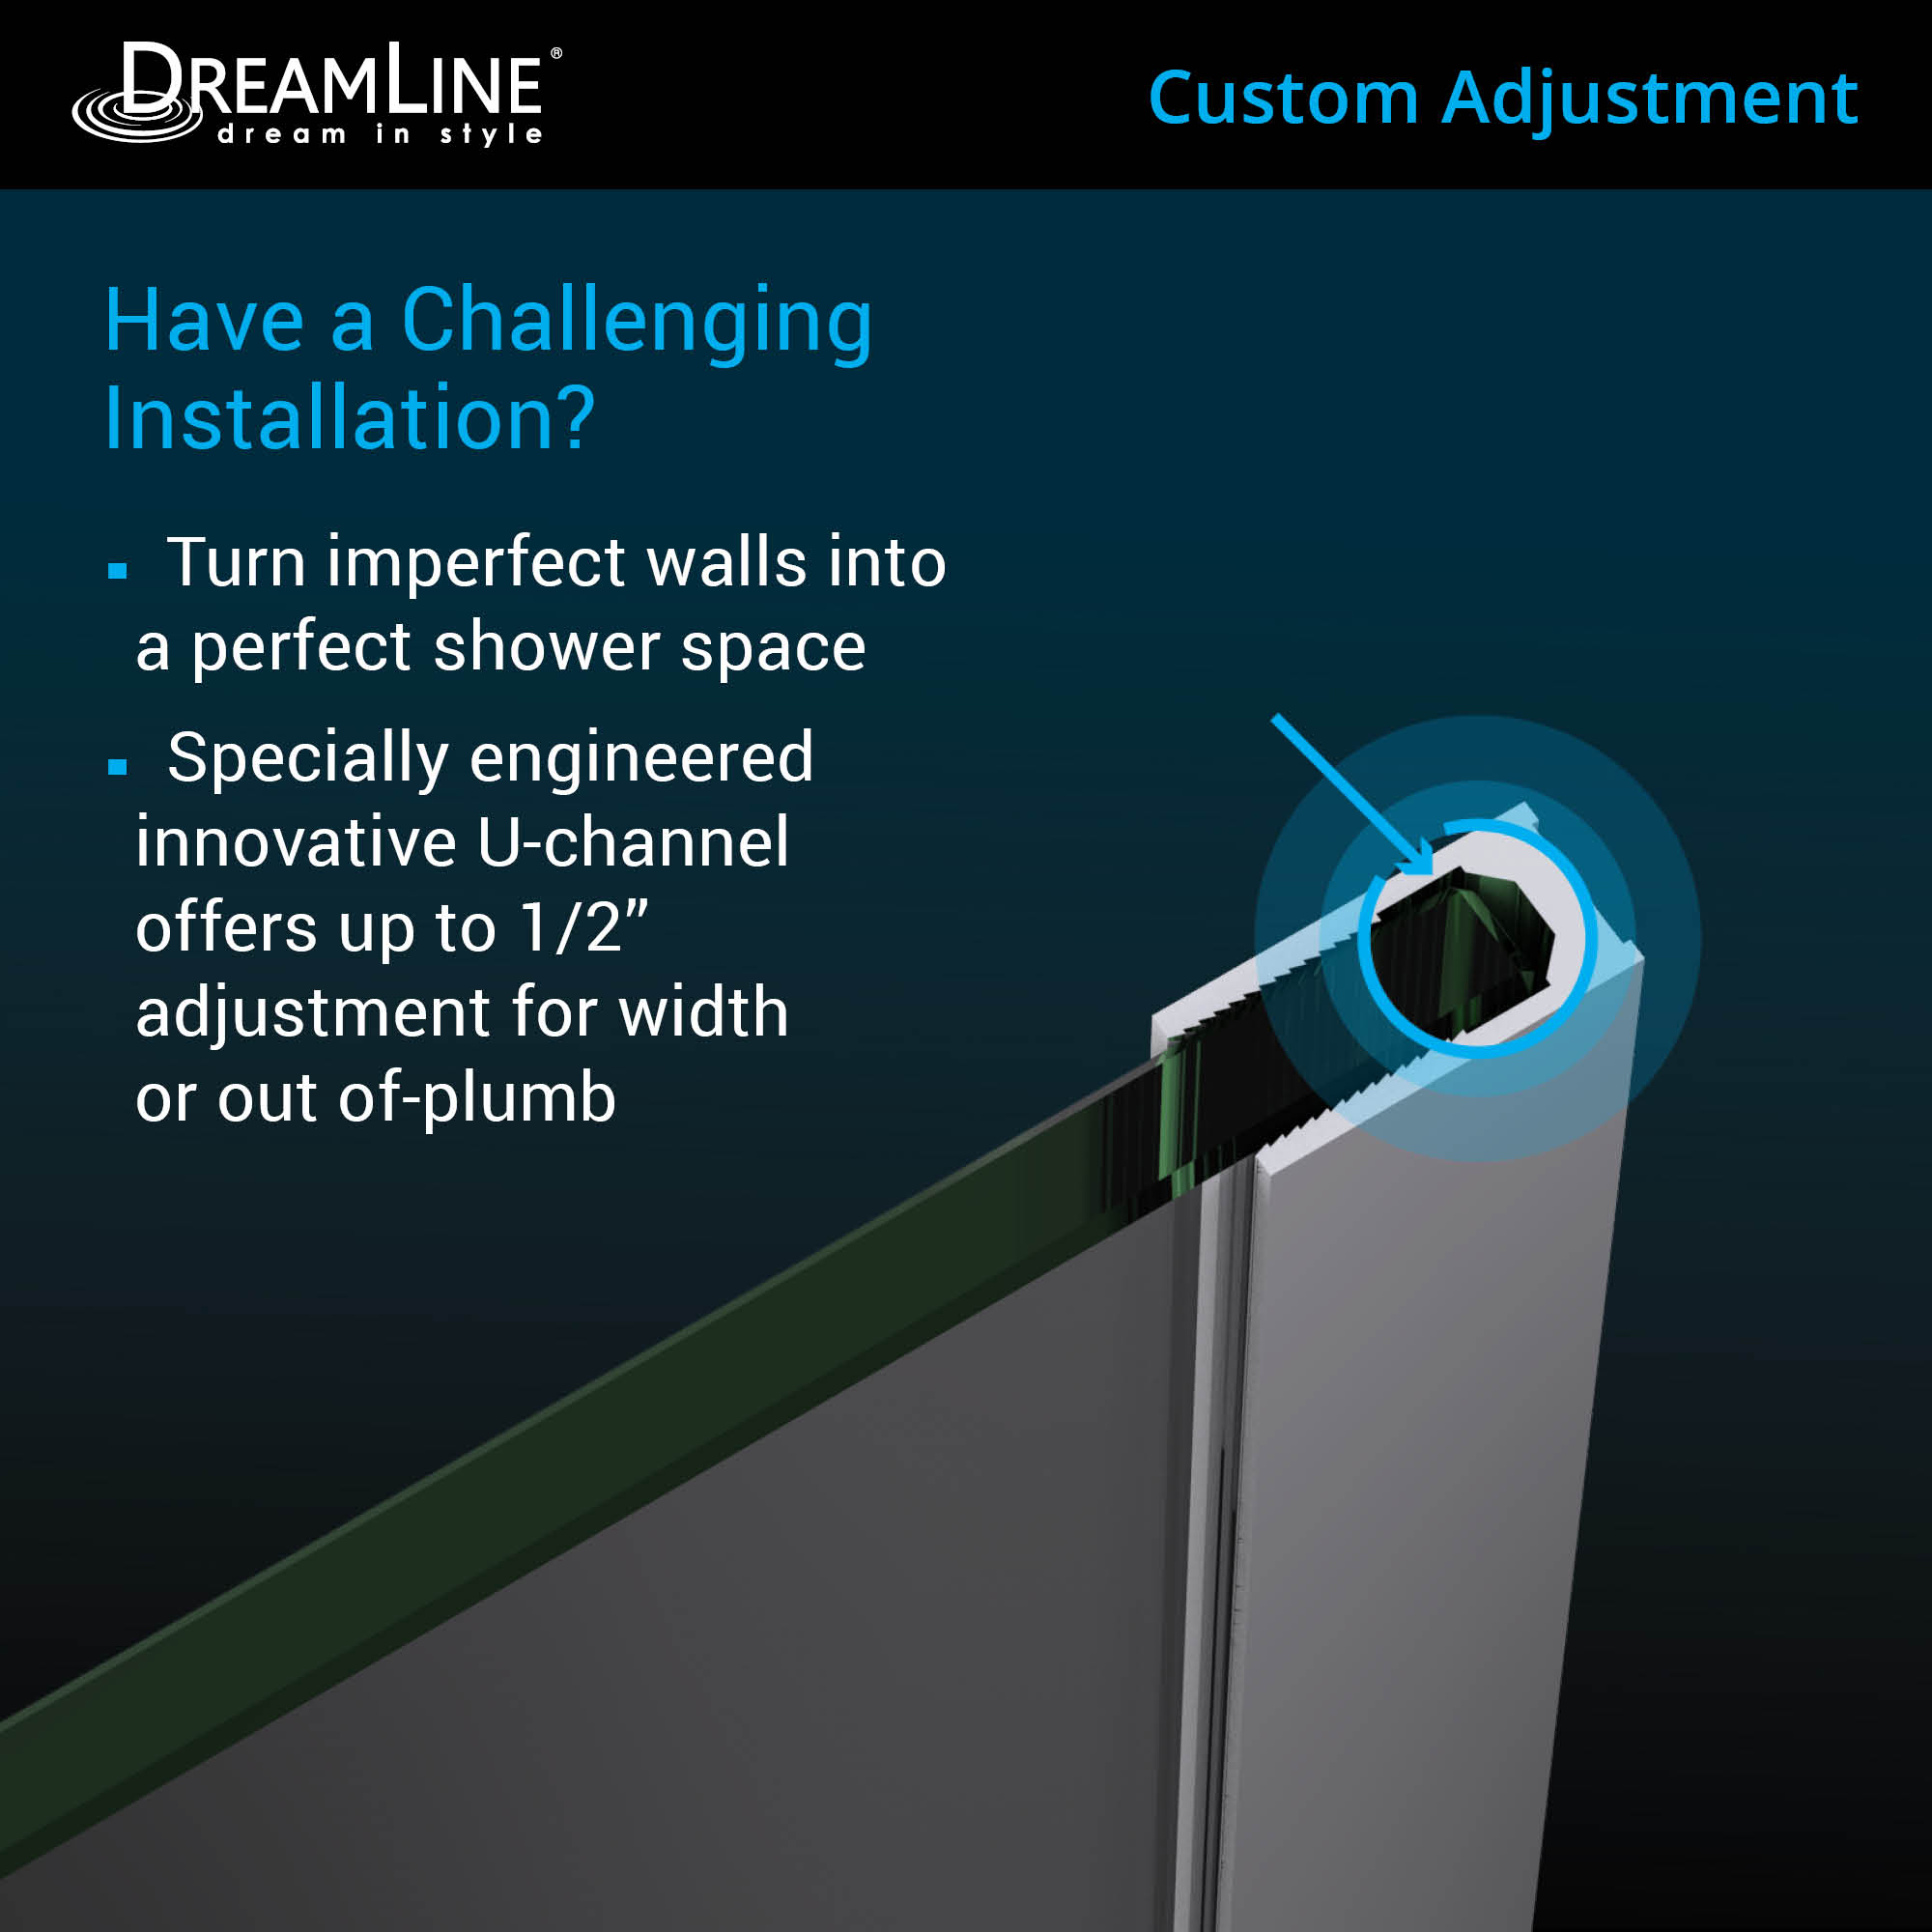 DreamLine Unidoor Plus 55 1/2 in. W x 30 3/8 in. D x 72 in. H Frameless Hinged Shower Enclosure, Clear Glass, Oil Rubbed Bronze